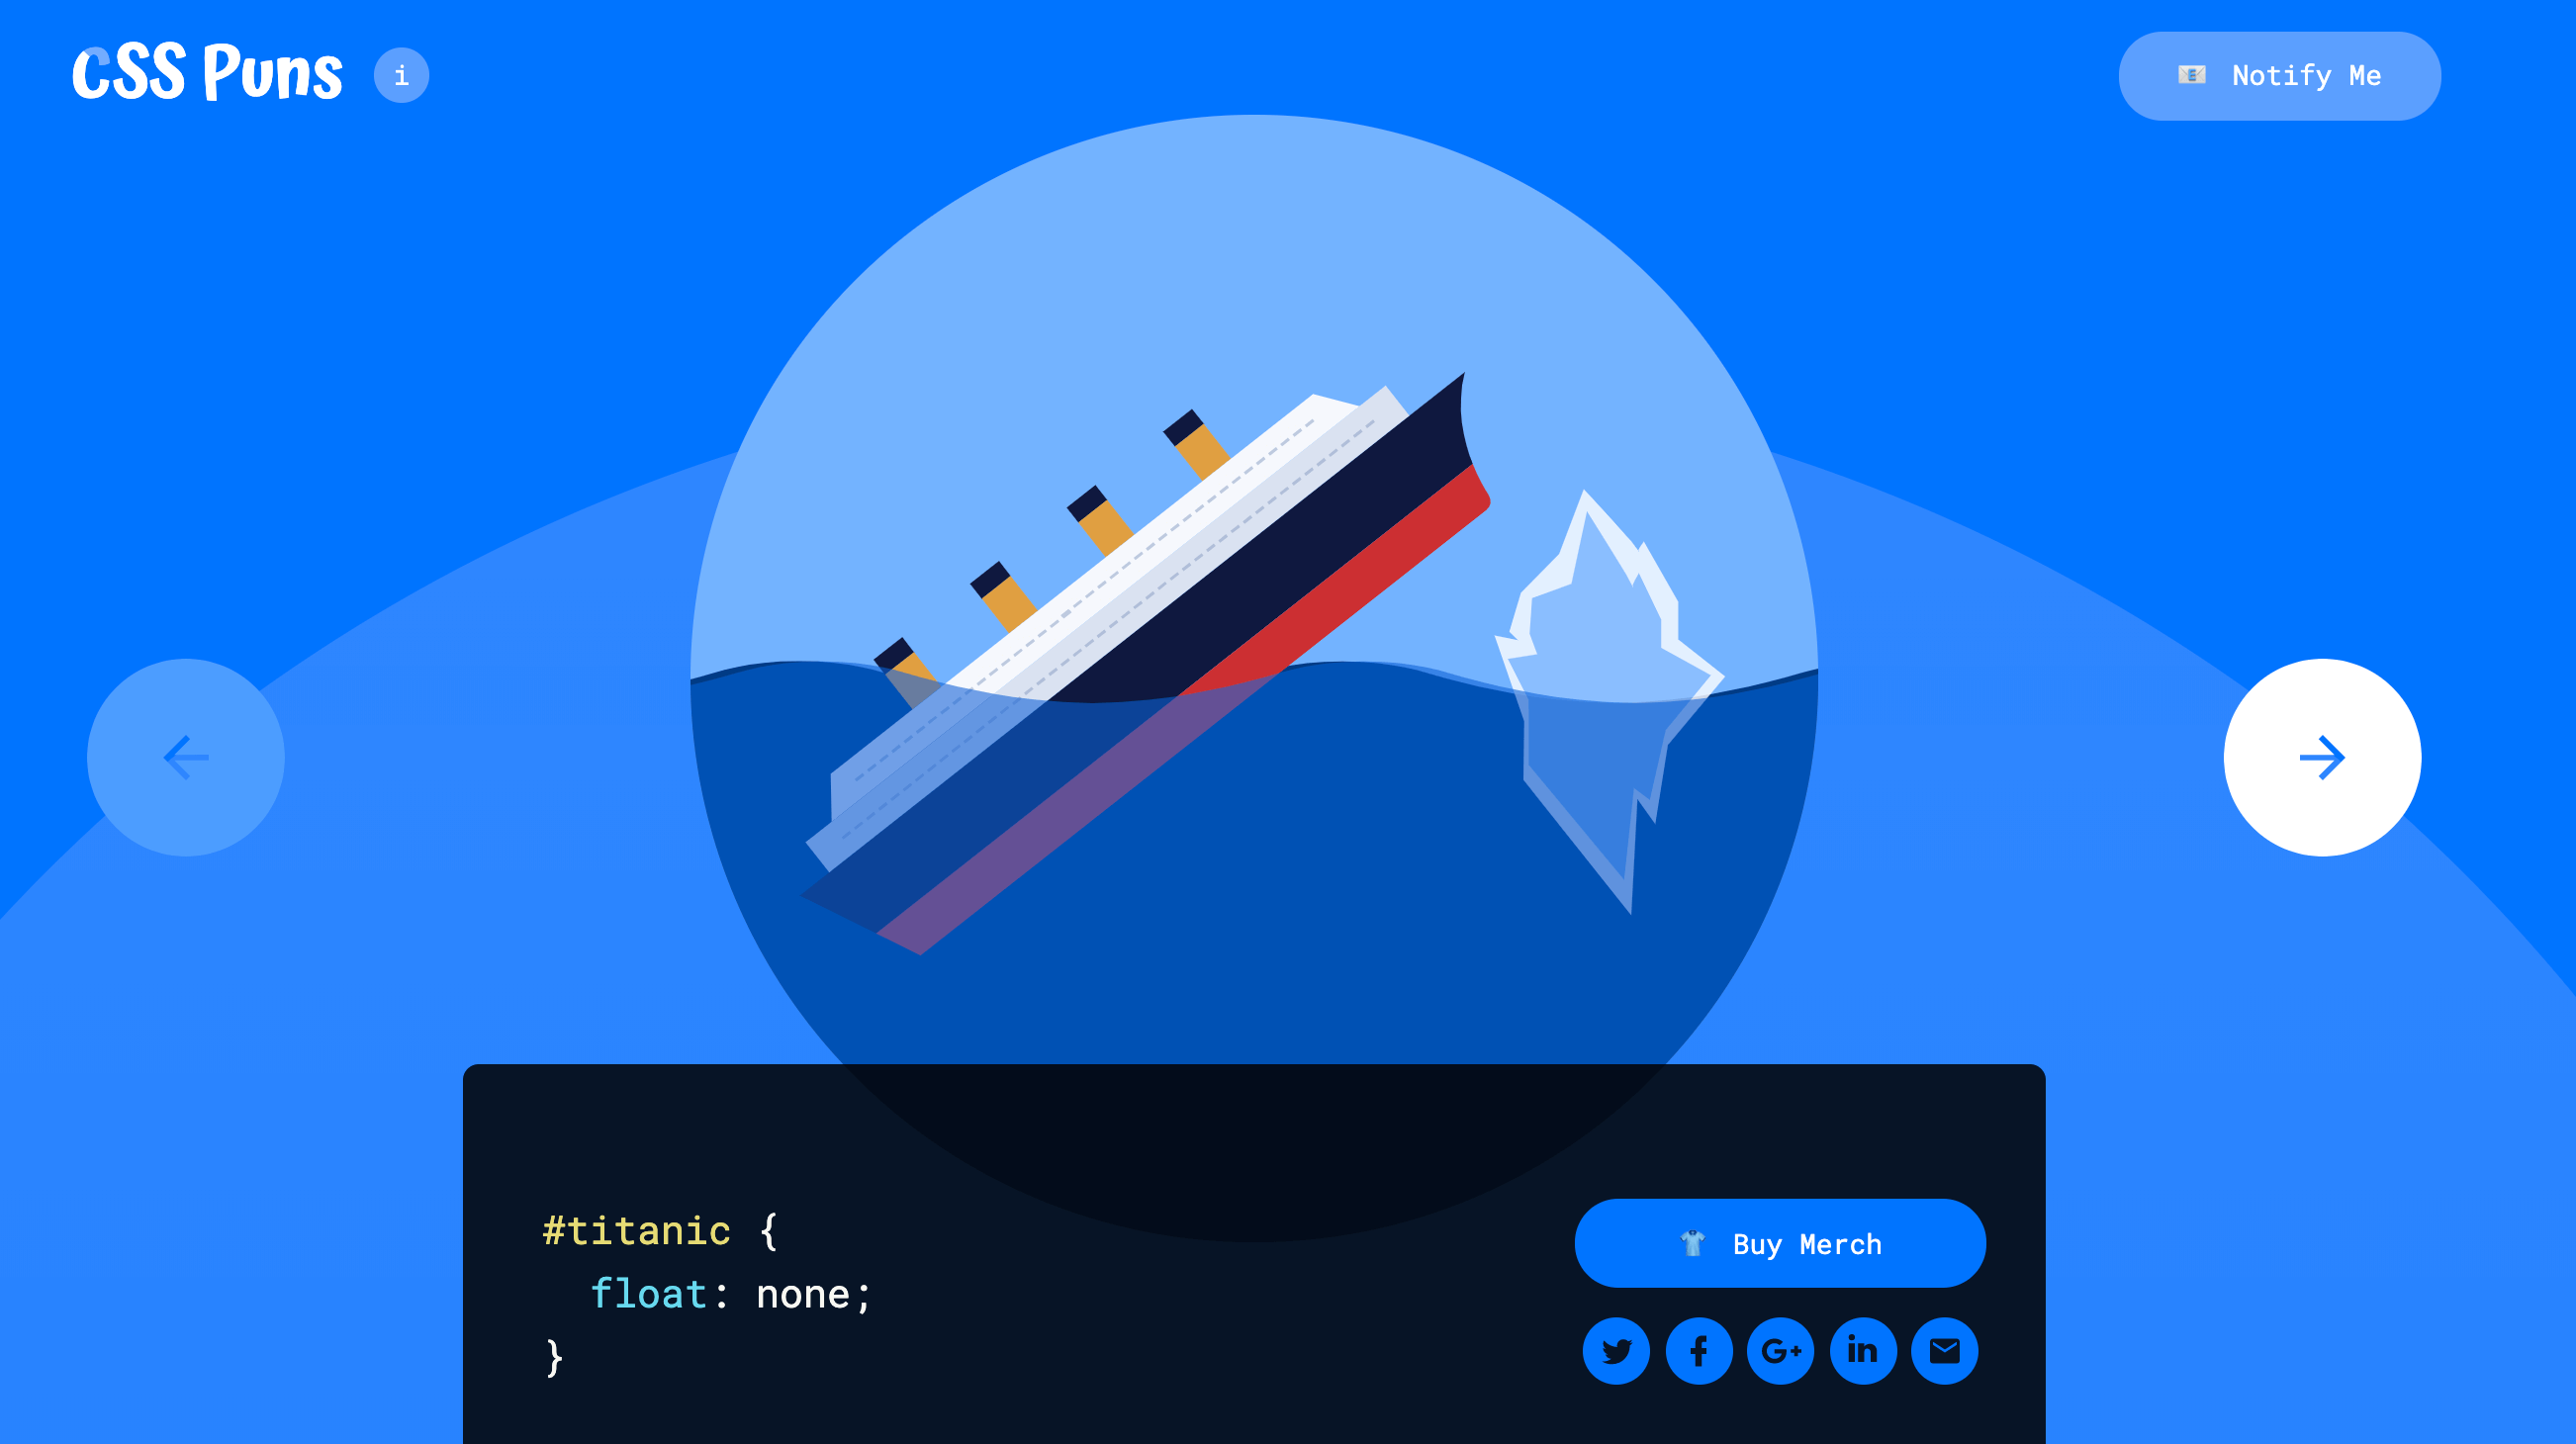 Let’s have some fun with CSS Puns